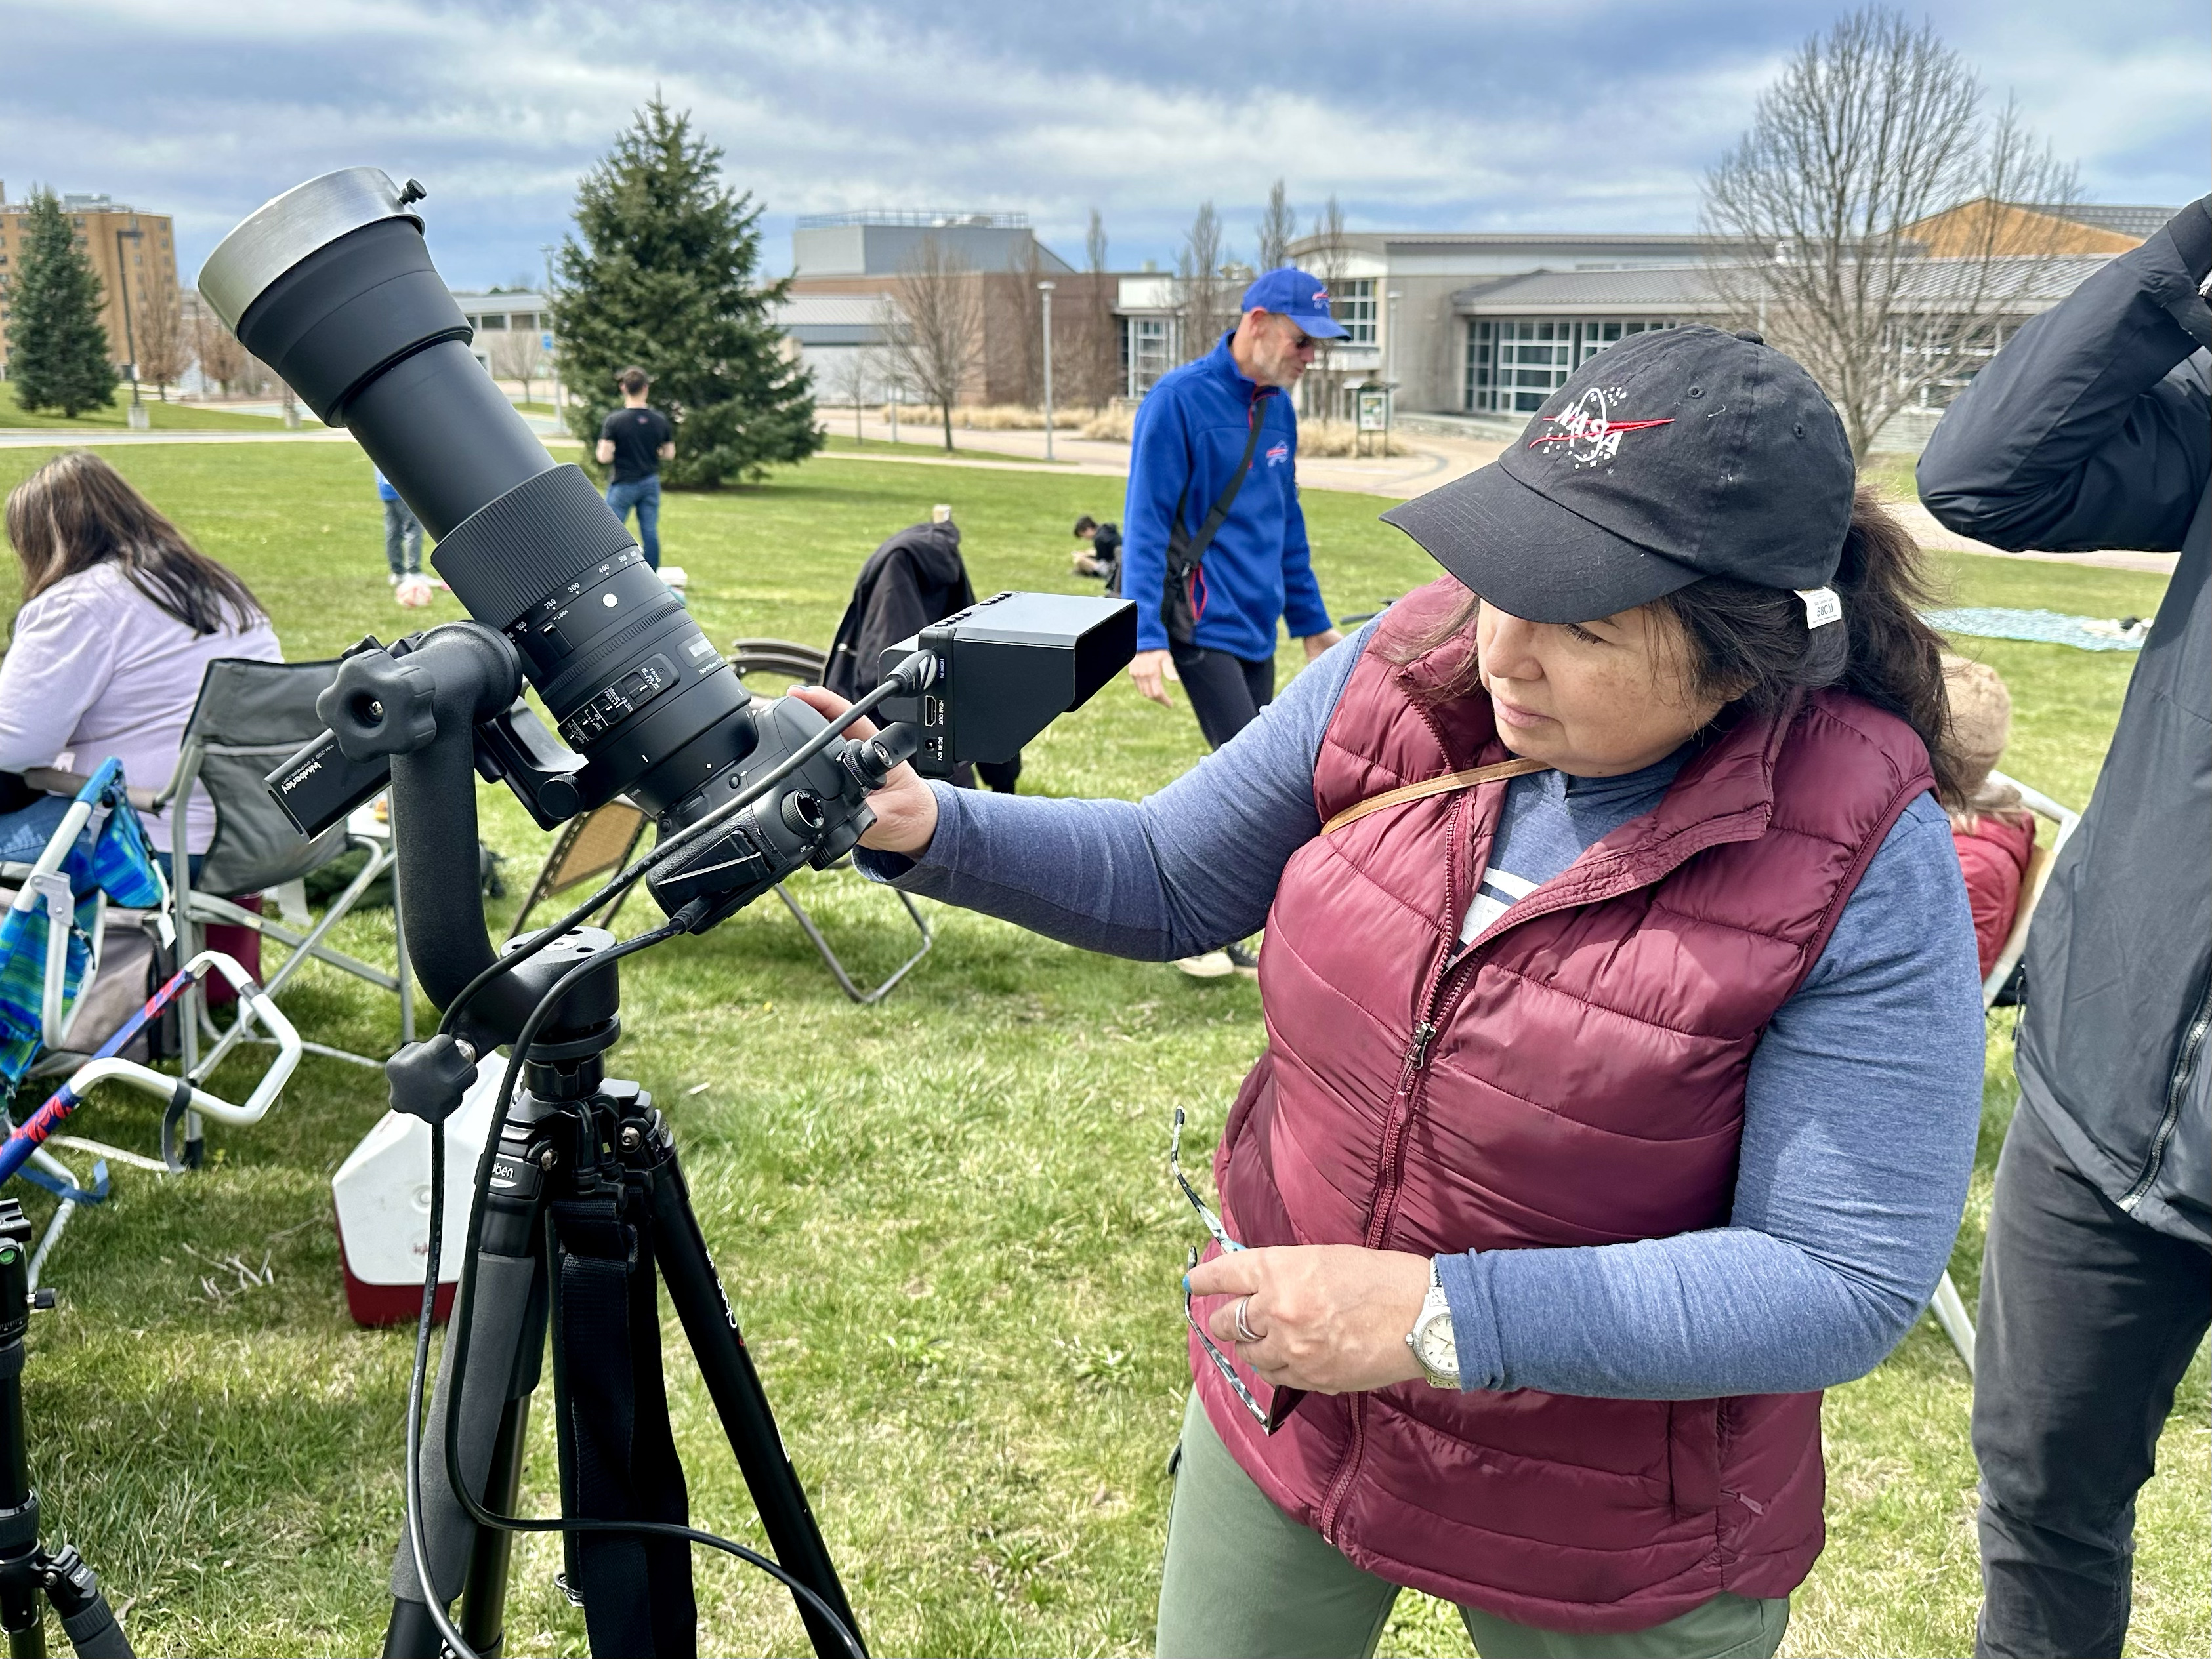 Visitors traveled near and far to see the total solar eclipse on campus, and some even brought professional photography equipment to get the perfect shot, including a solar lens.